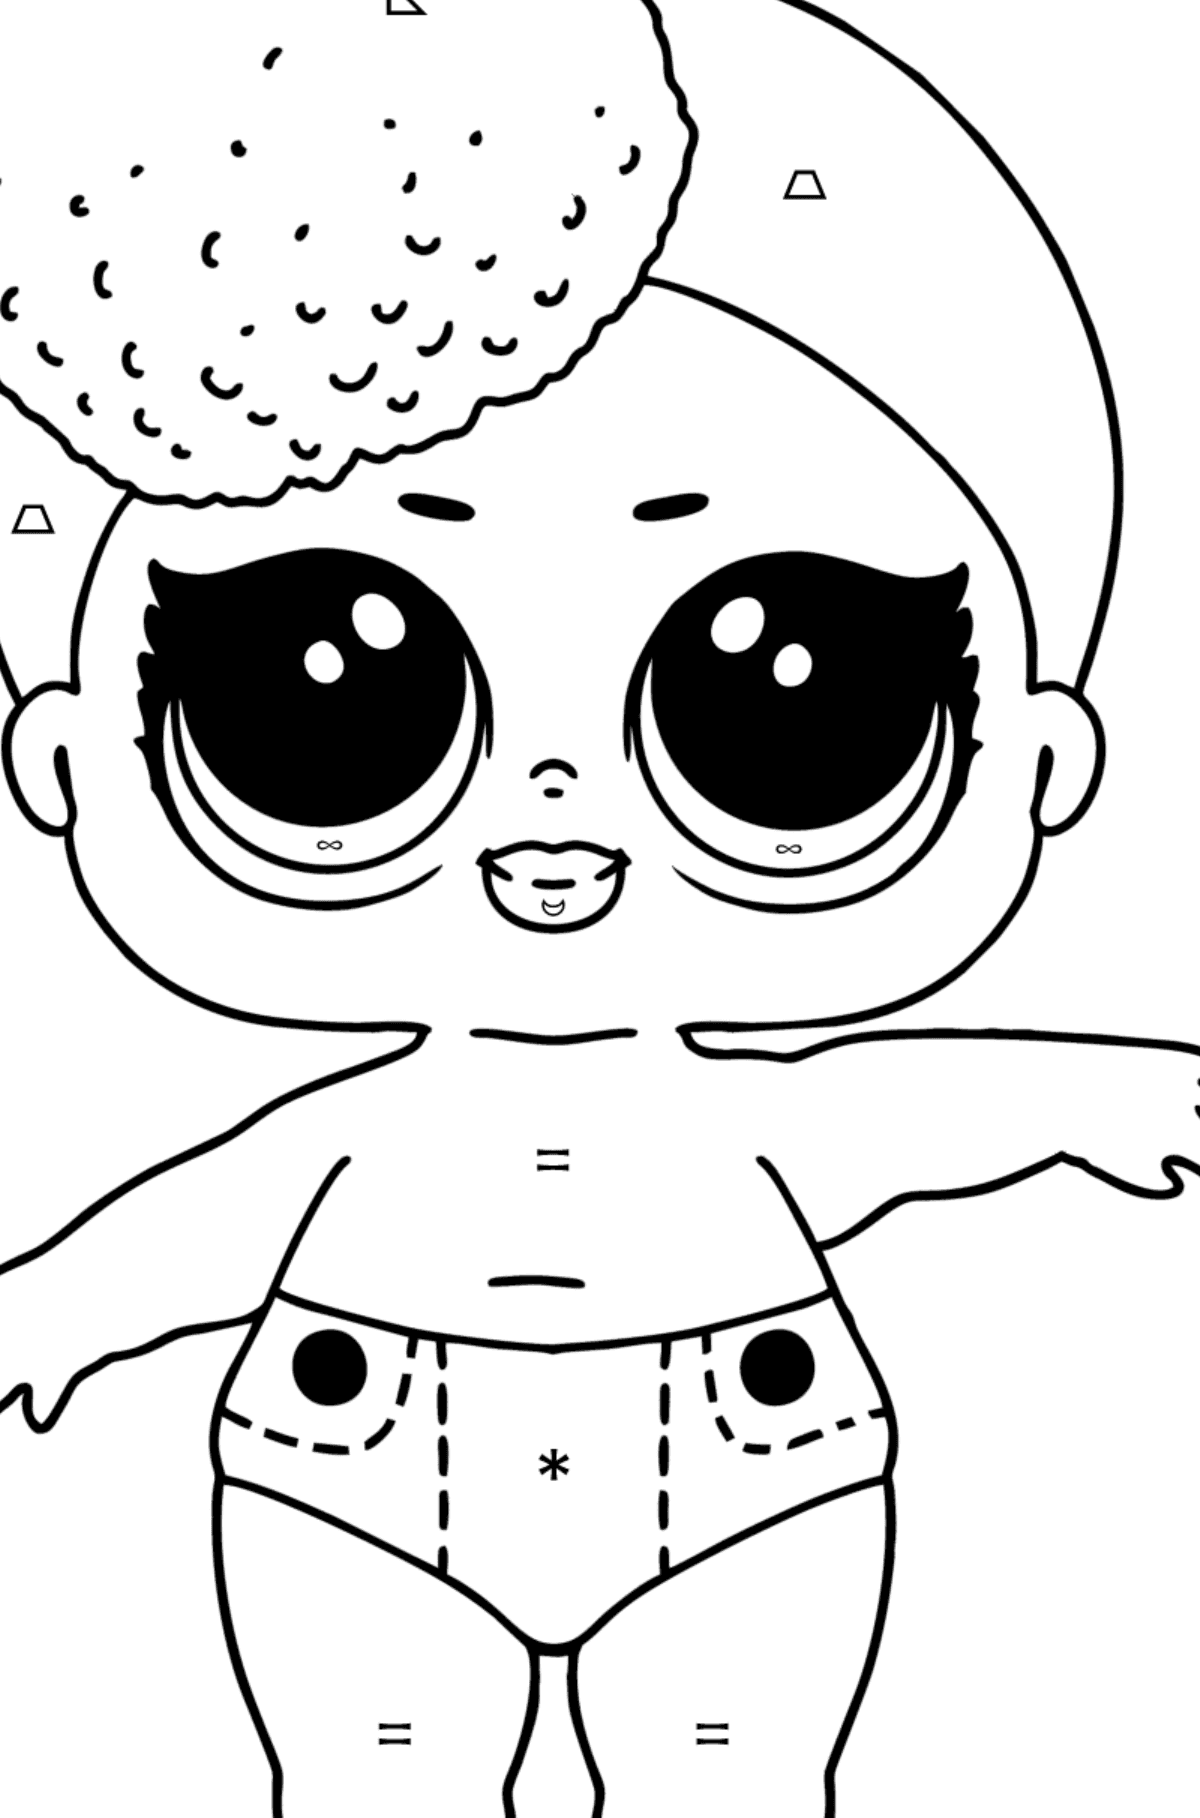 Coloring page LOL LIL Independent - Coloring by Symbols and Geometric Shapes for Kids